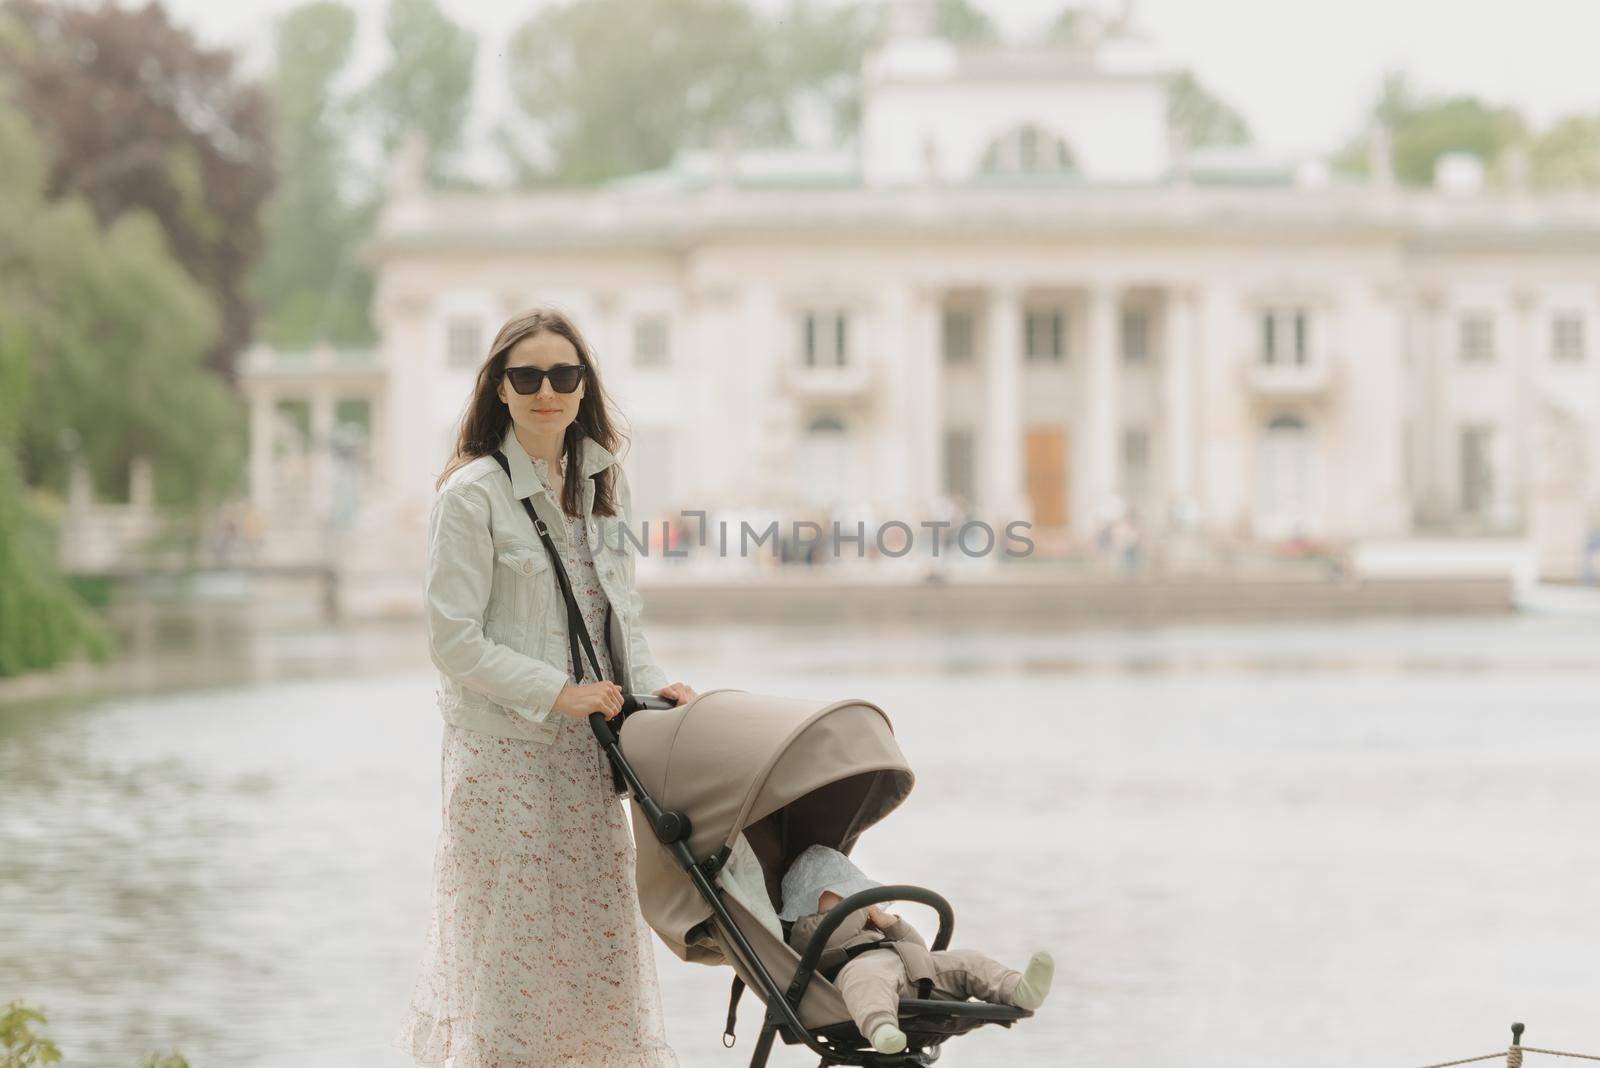 A mother is posing with her baby in the stroller on the territory of the palace. A mom in sunglasses with a baby in the carriage with classical architecture in the background in the park.